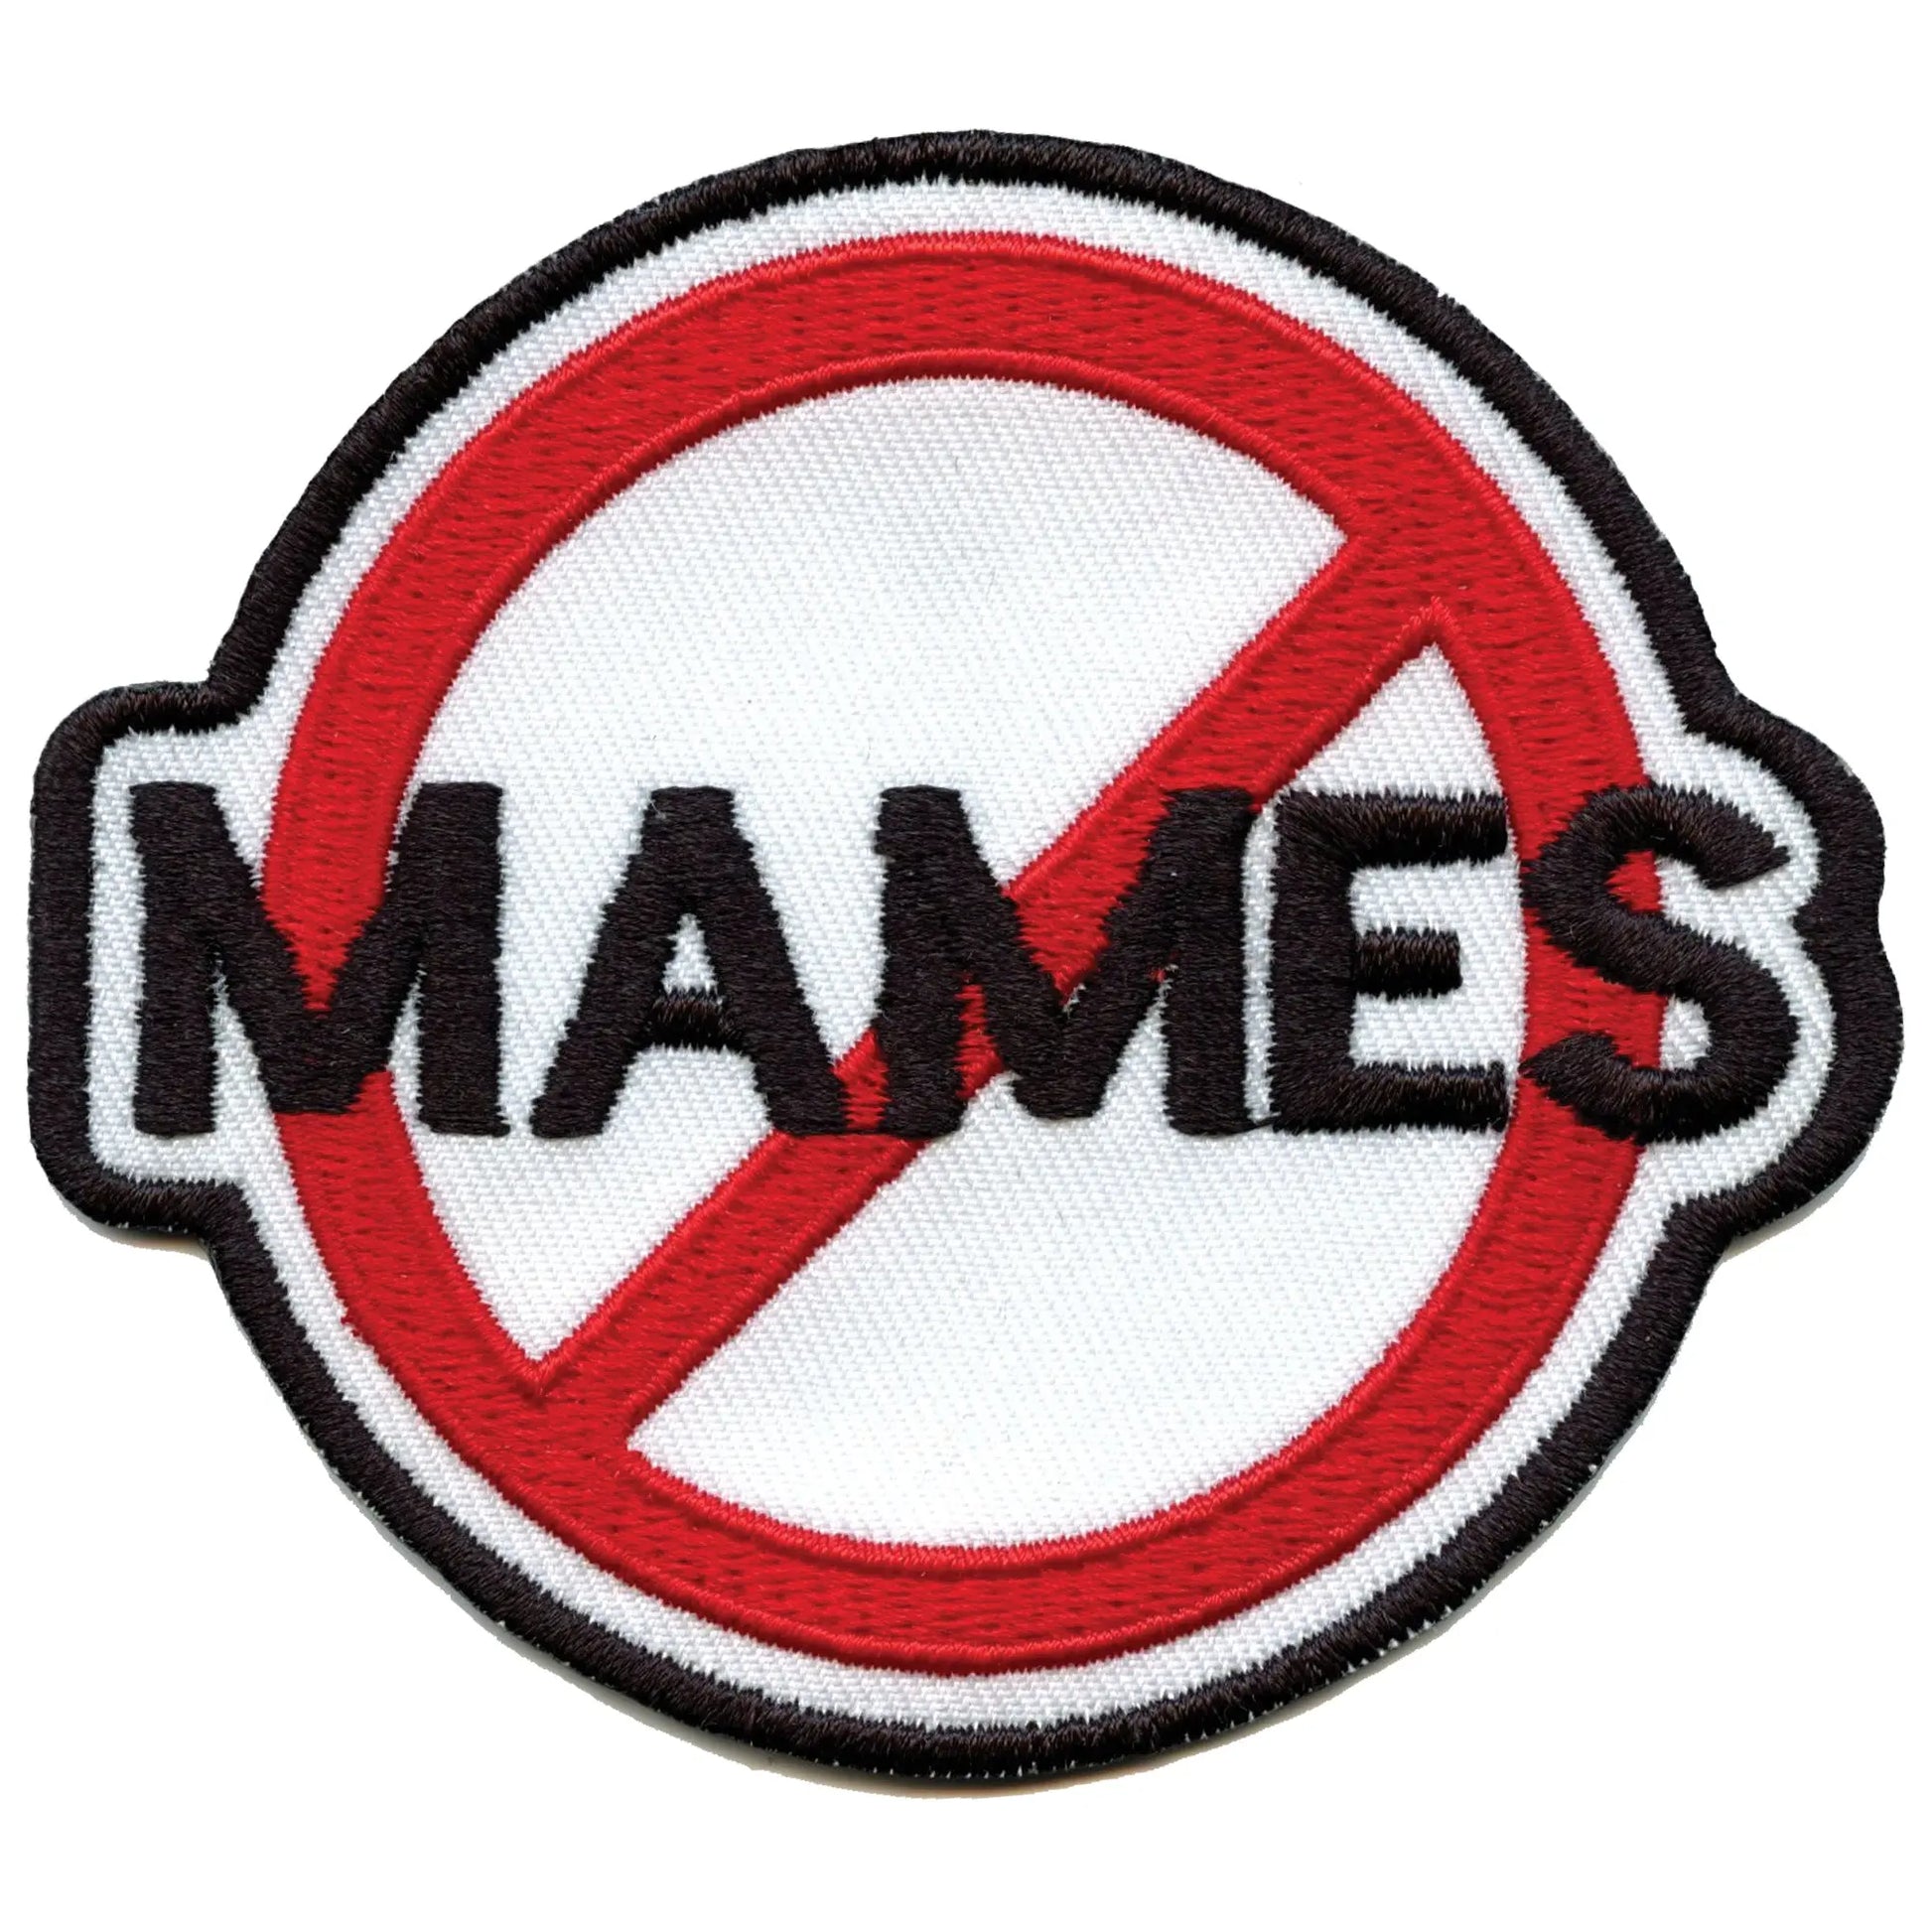 No Mames Hispanic Expression Embroidered Iron On Patch 